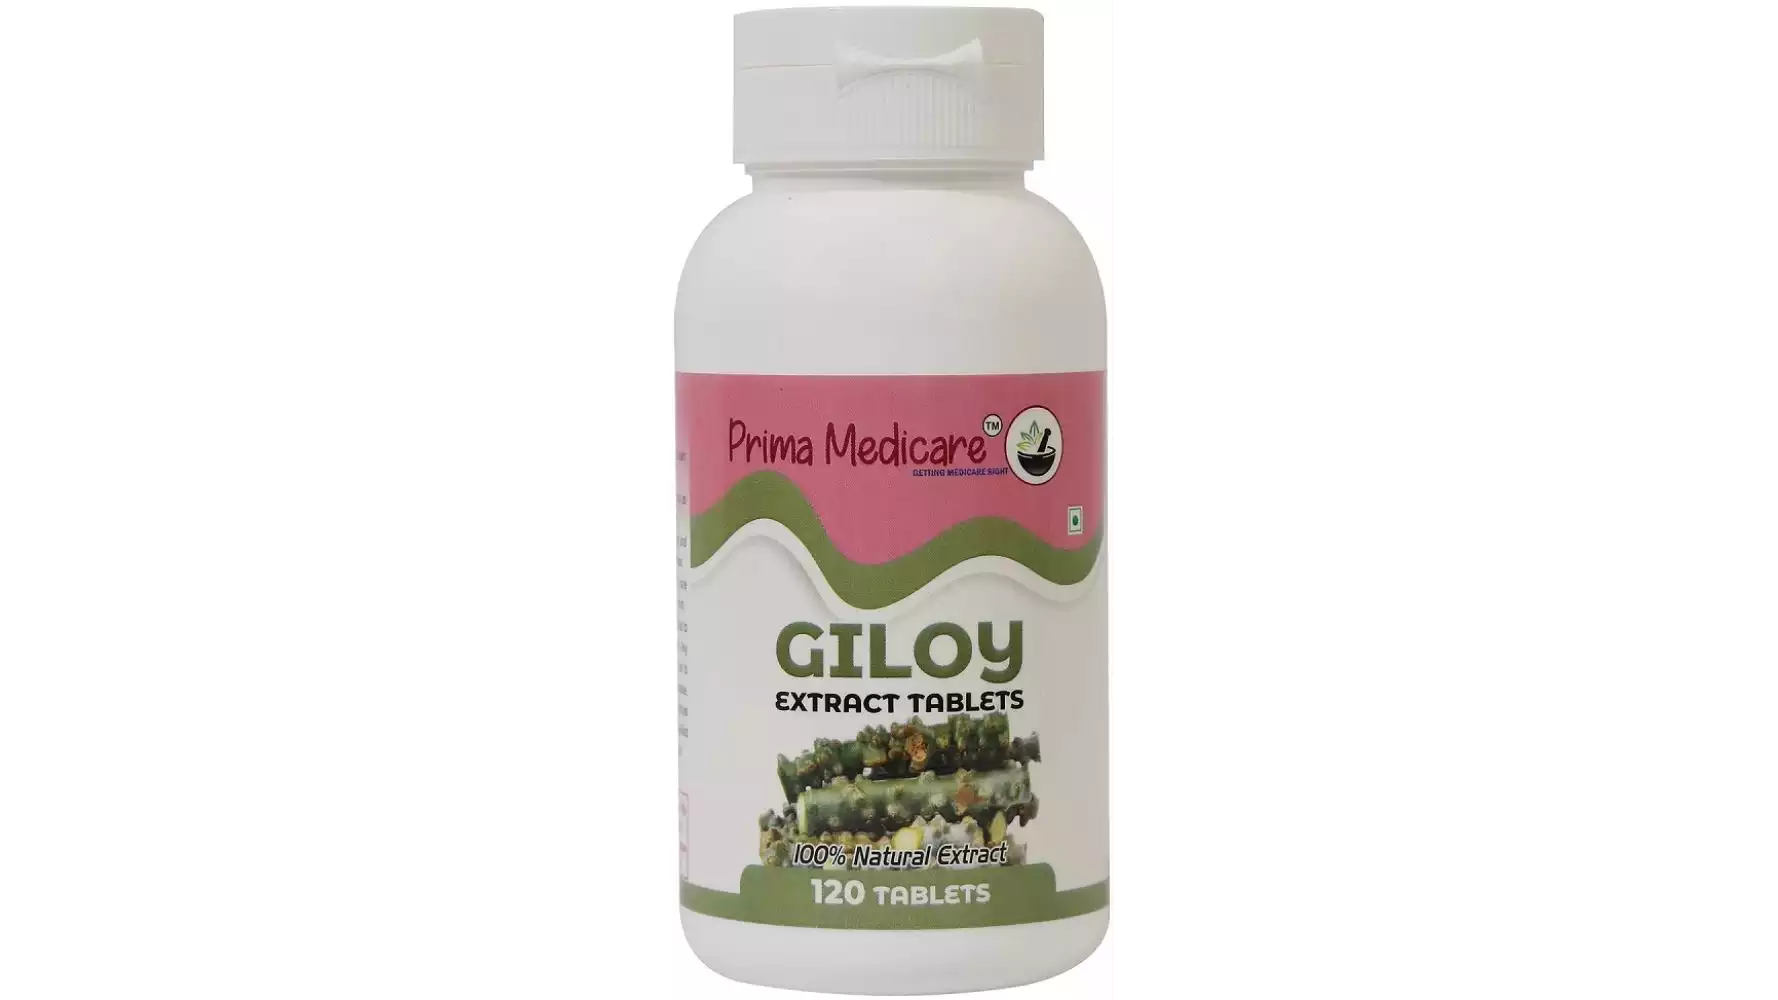 Prima Medicare Giloy Extract Tablets (120tab)